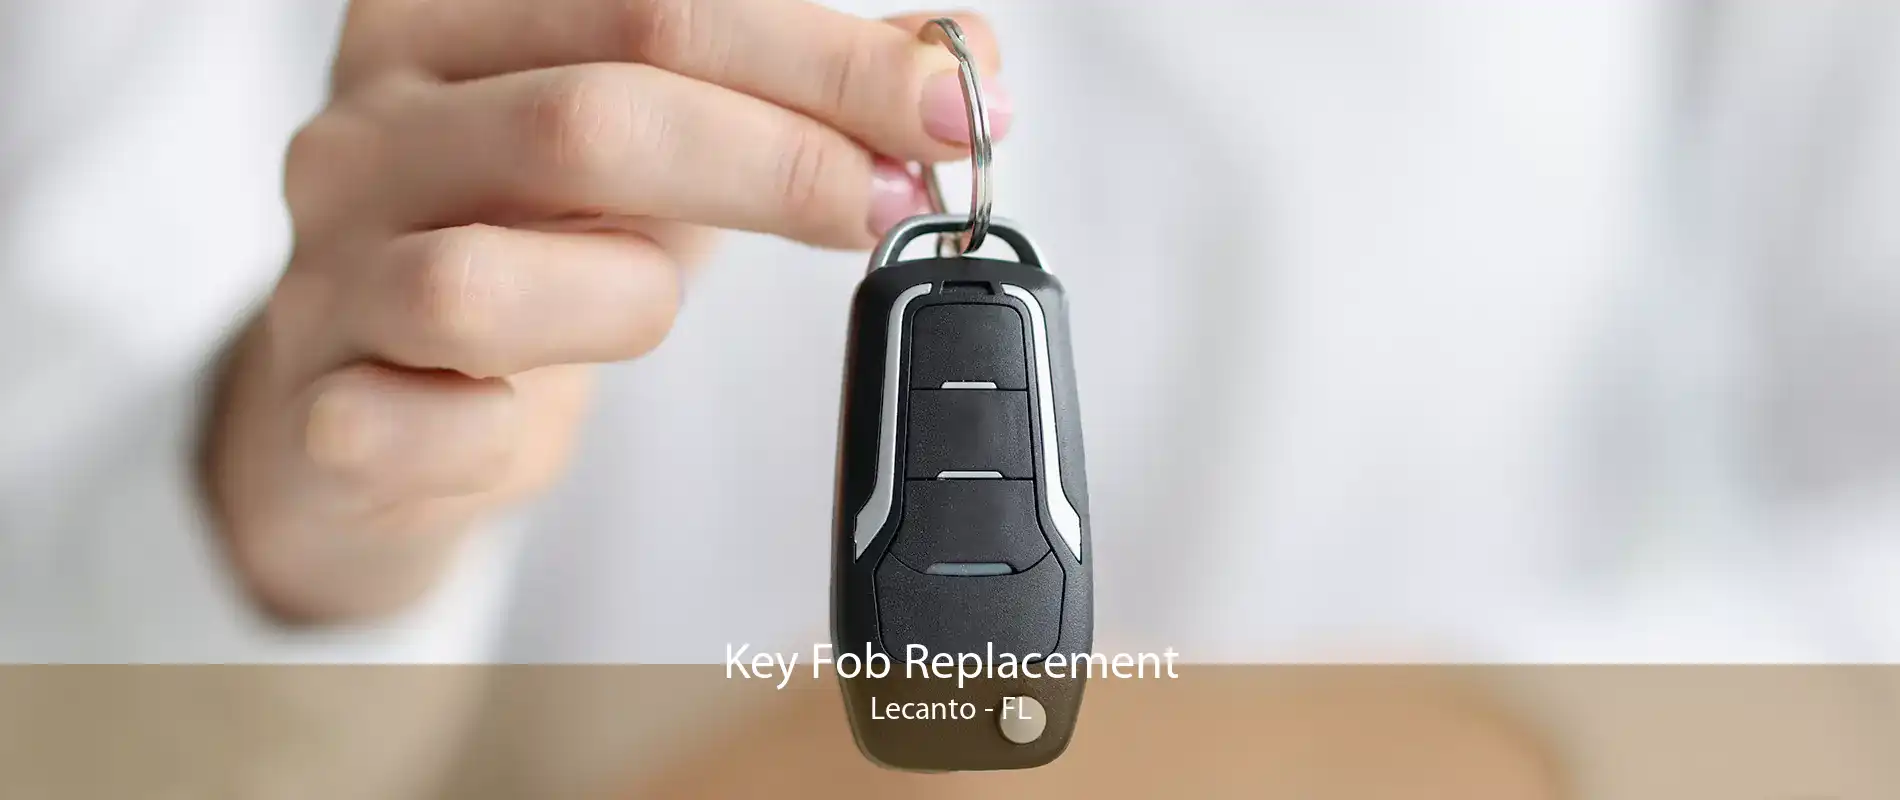 Key Fob Replacement Lecanto - FL